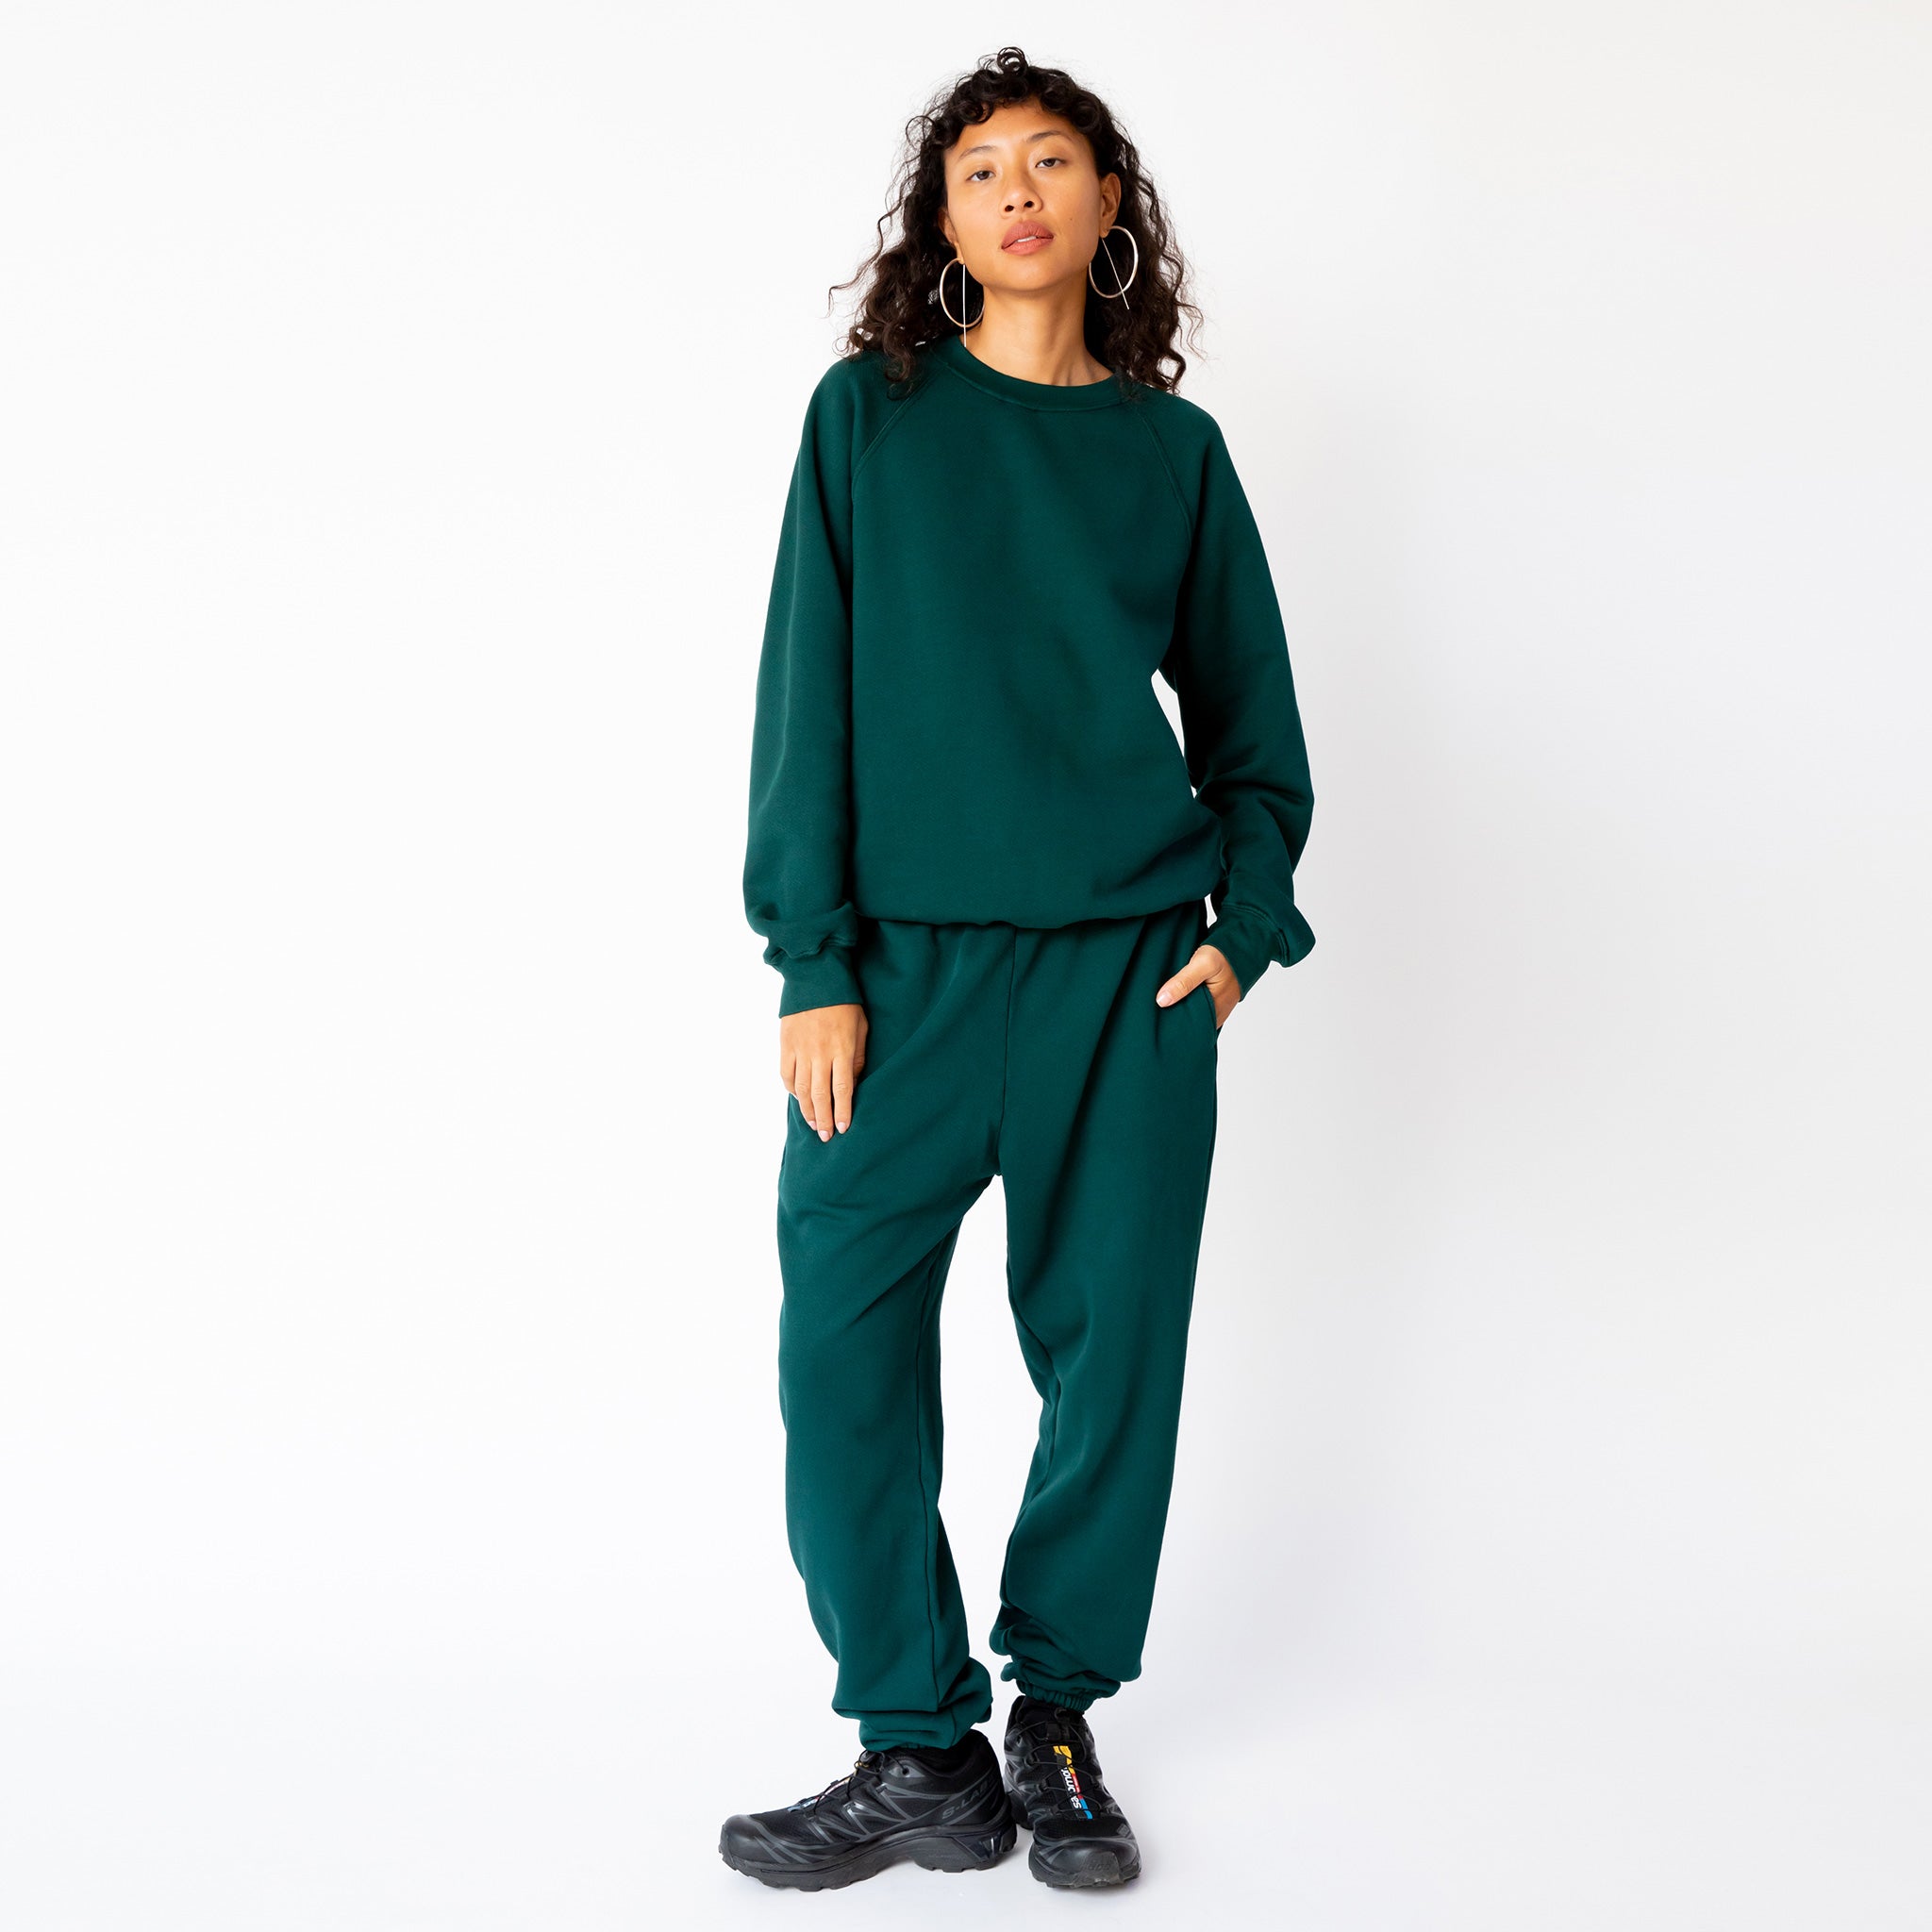 A model wears the classic sweatpant by Les Tien in an emerald green color - full outfit view with matching sweatshirt.